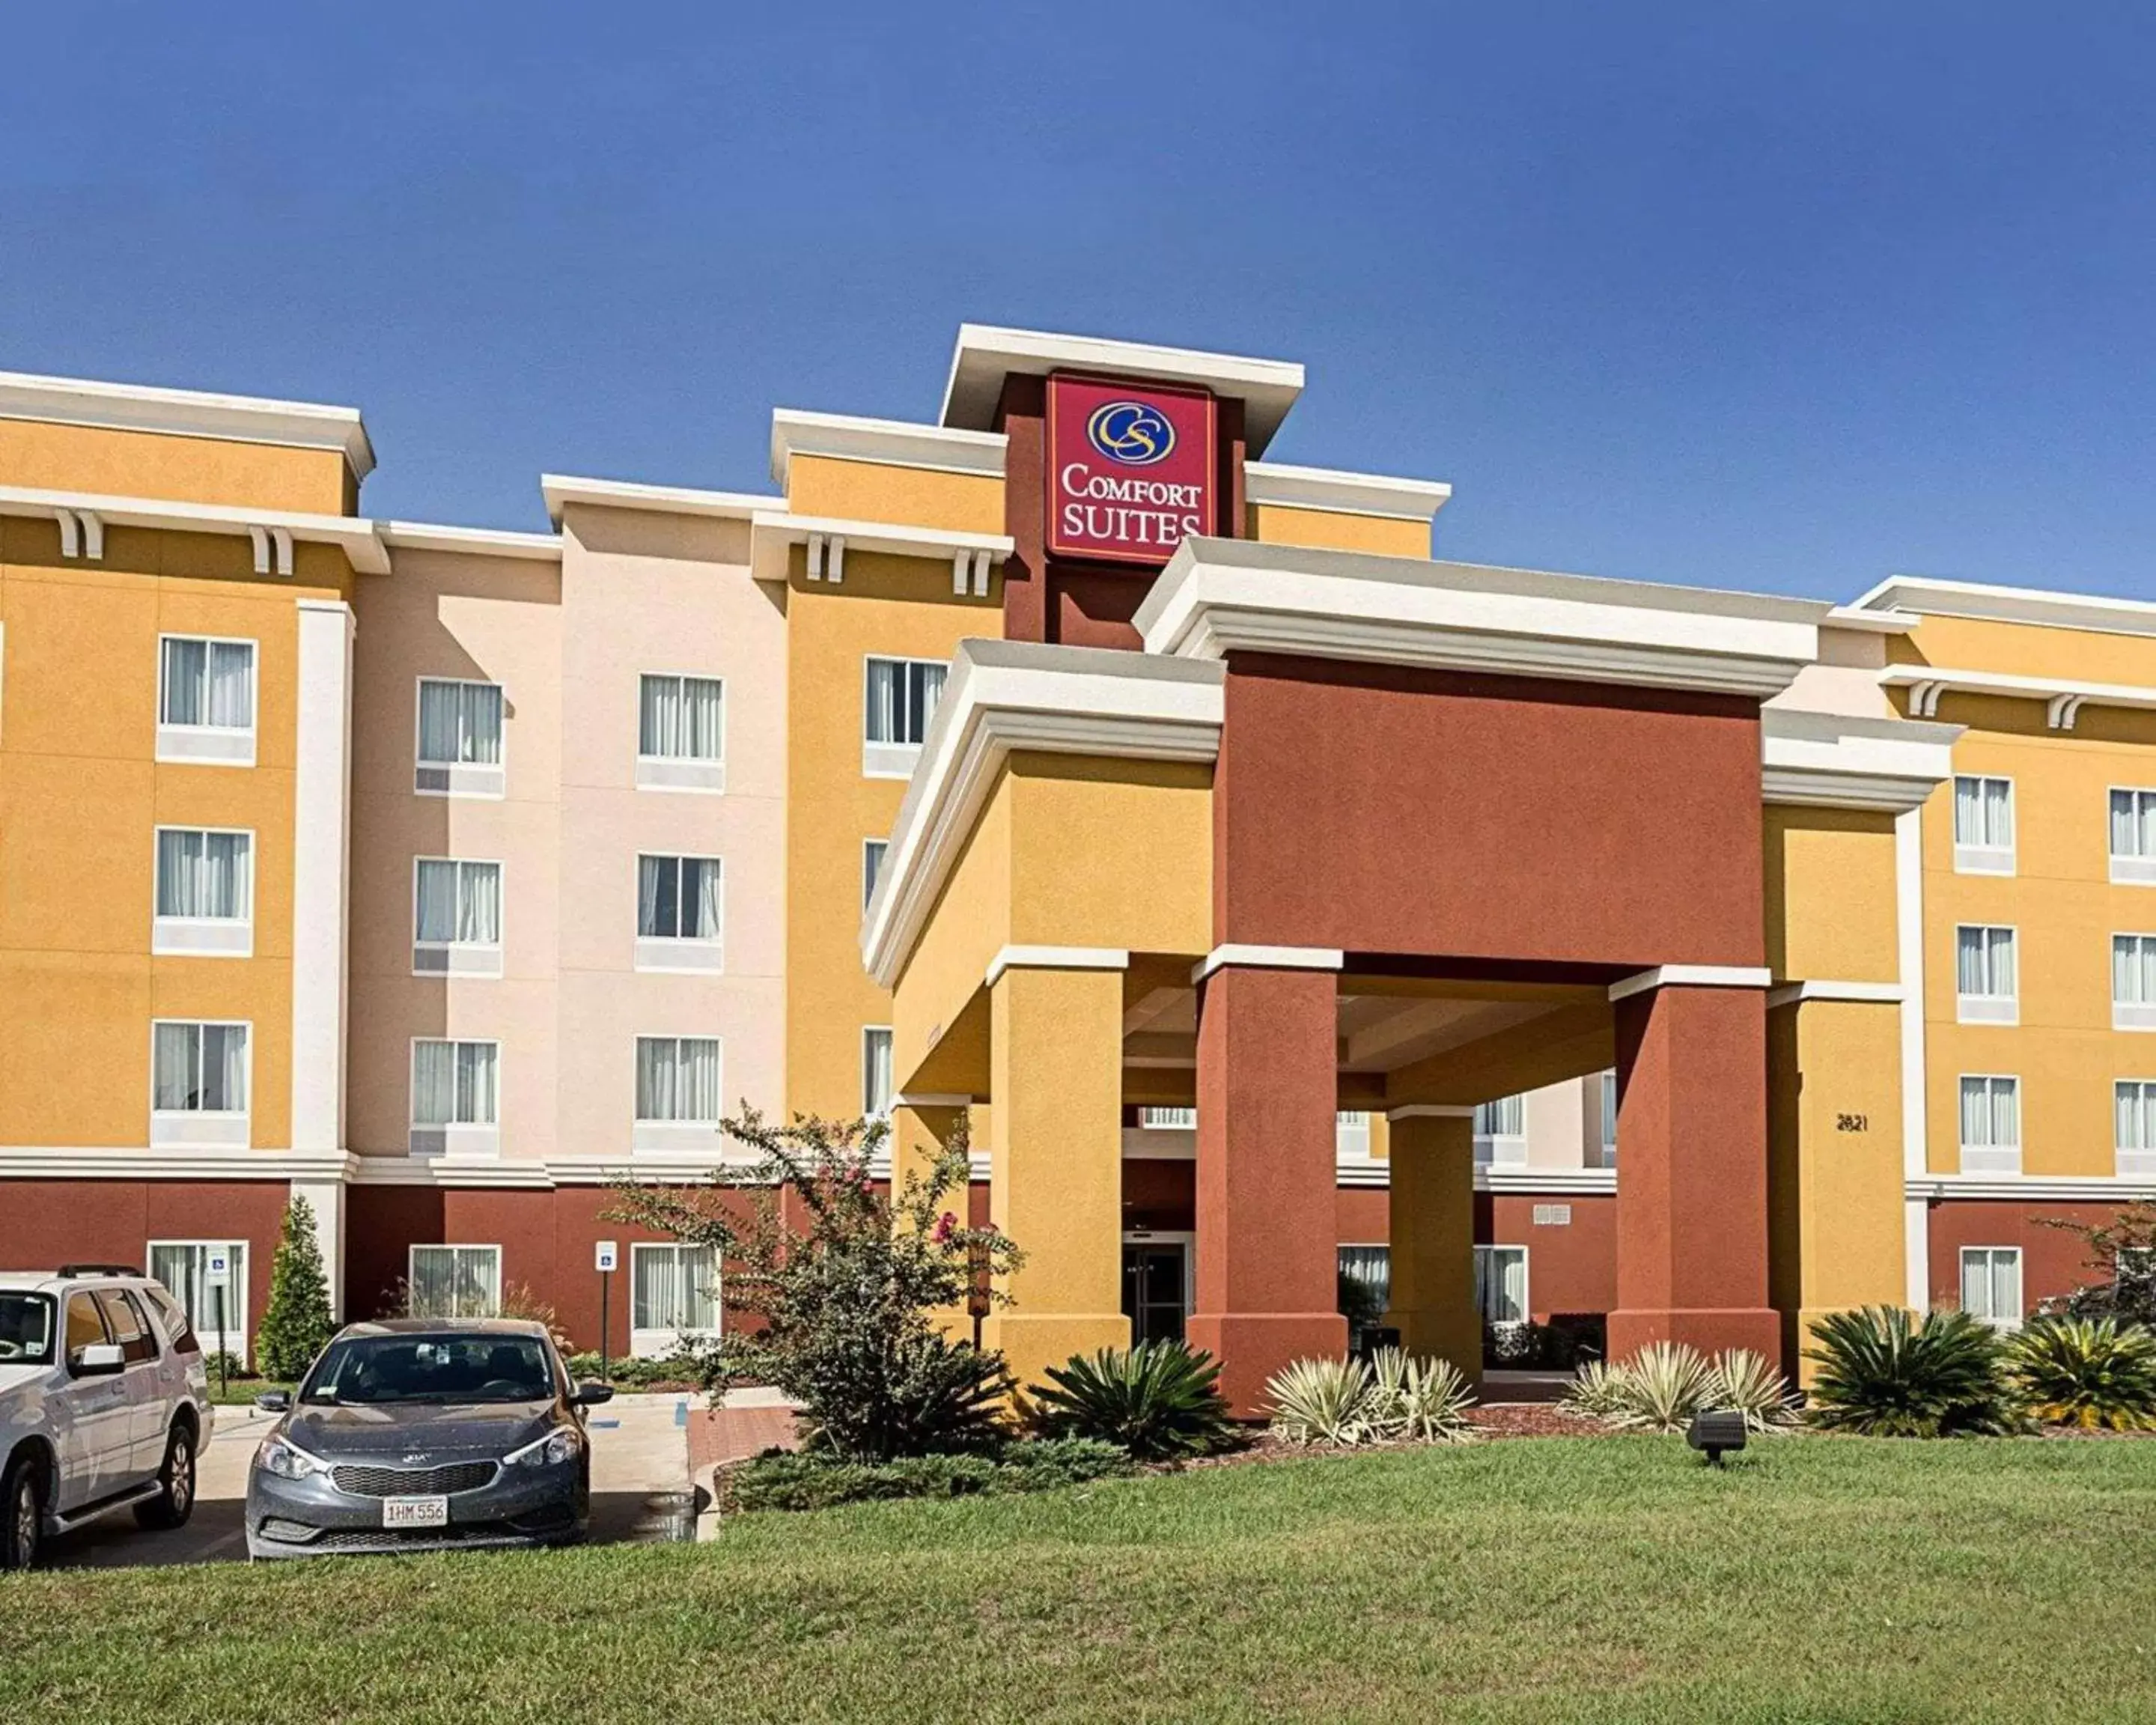 Property Building in Comfort Suites near Tanger Outlet Mall